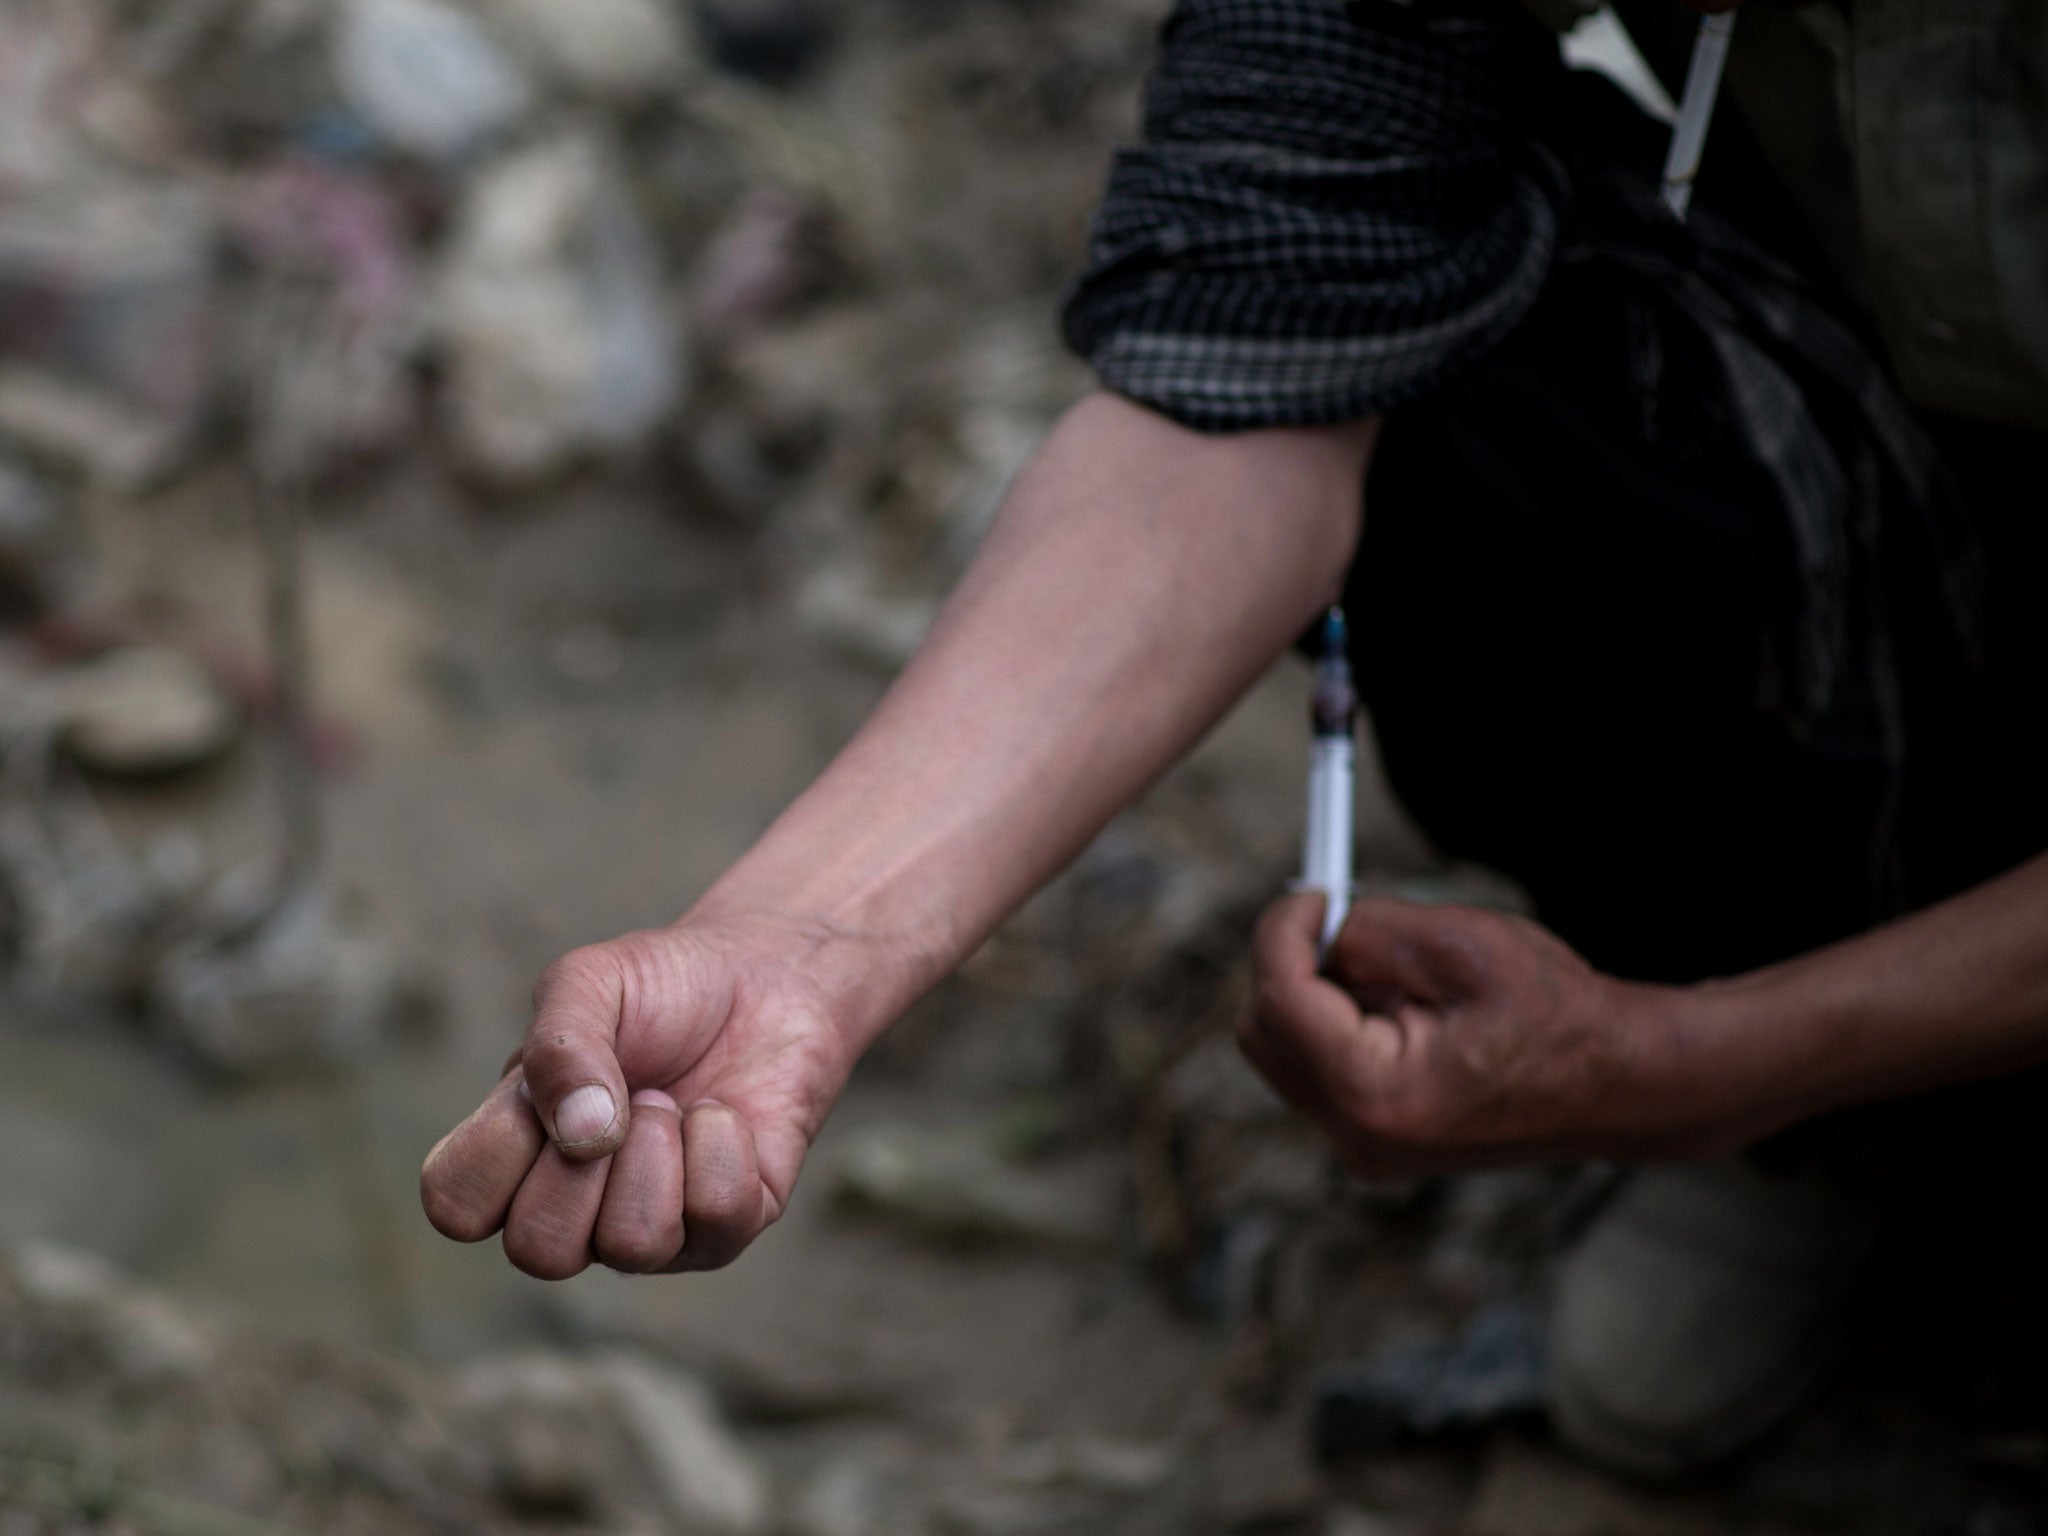 A drug addict injects heroin at a waste water canal in Kabul on April 25, 2012.